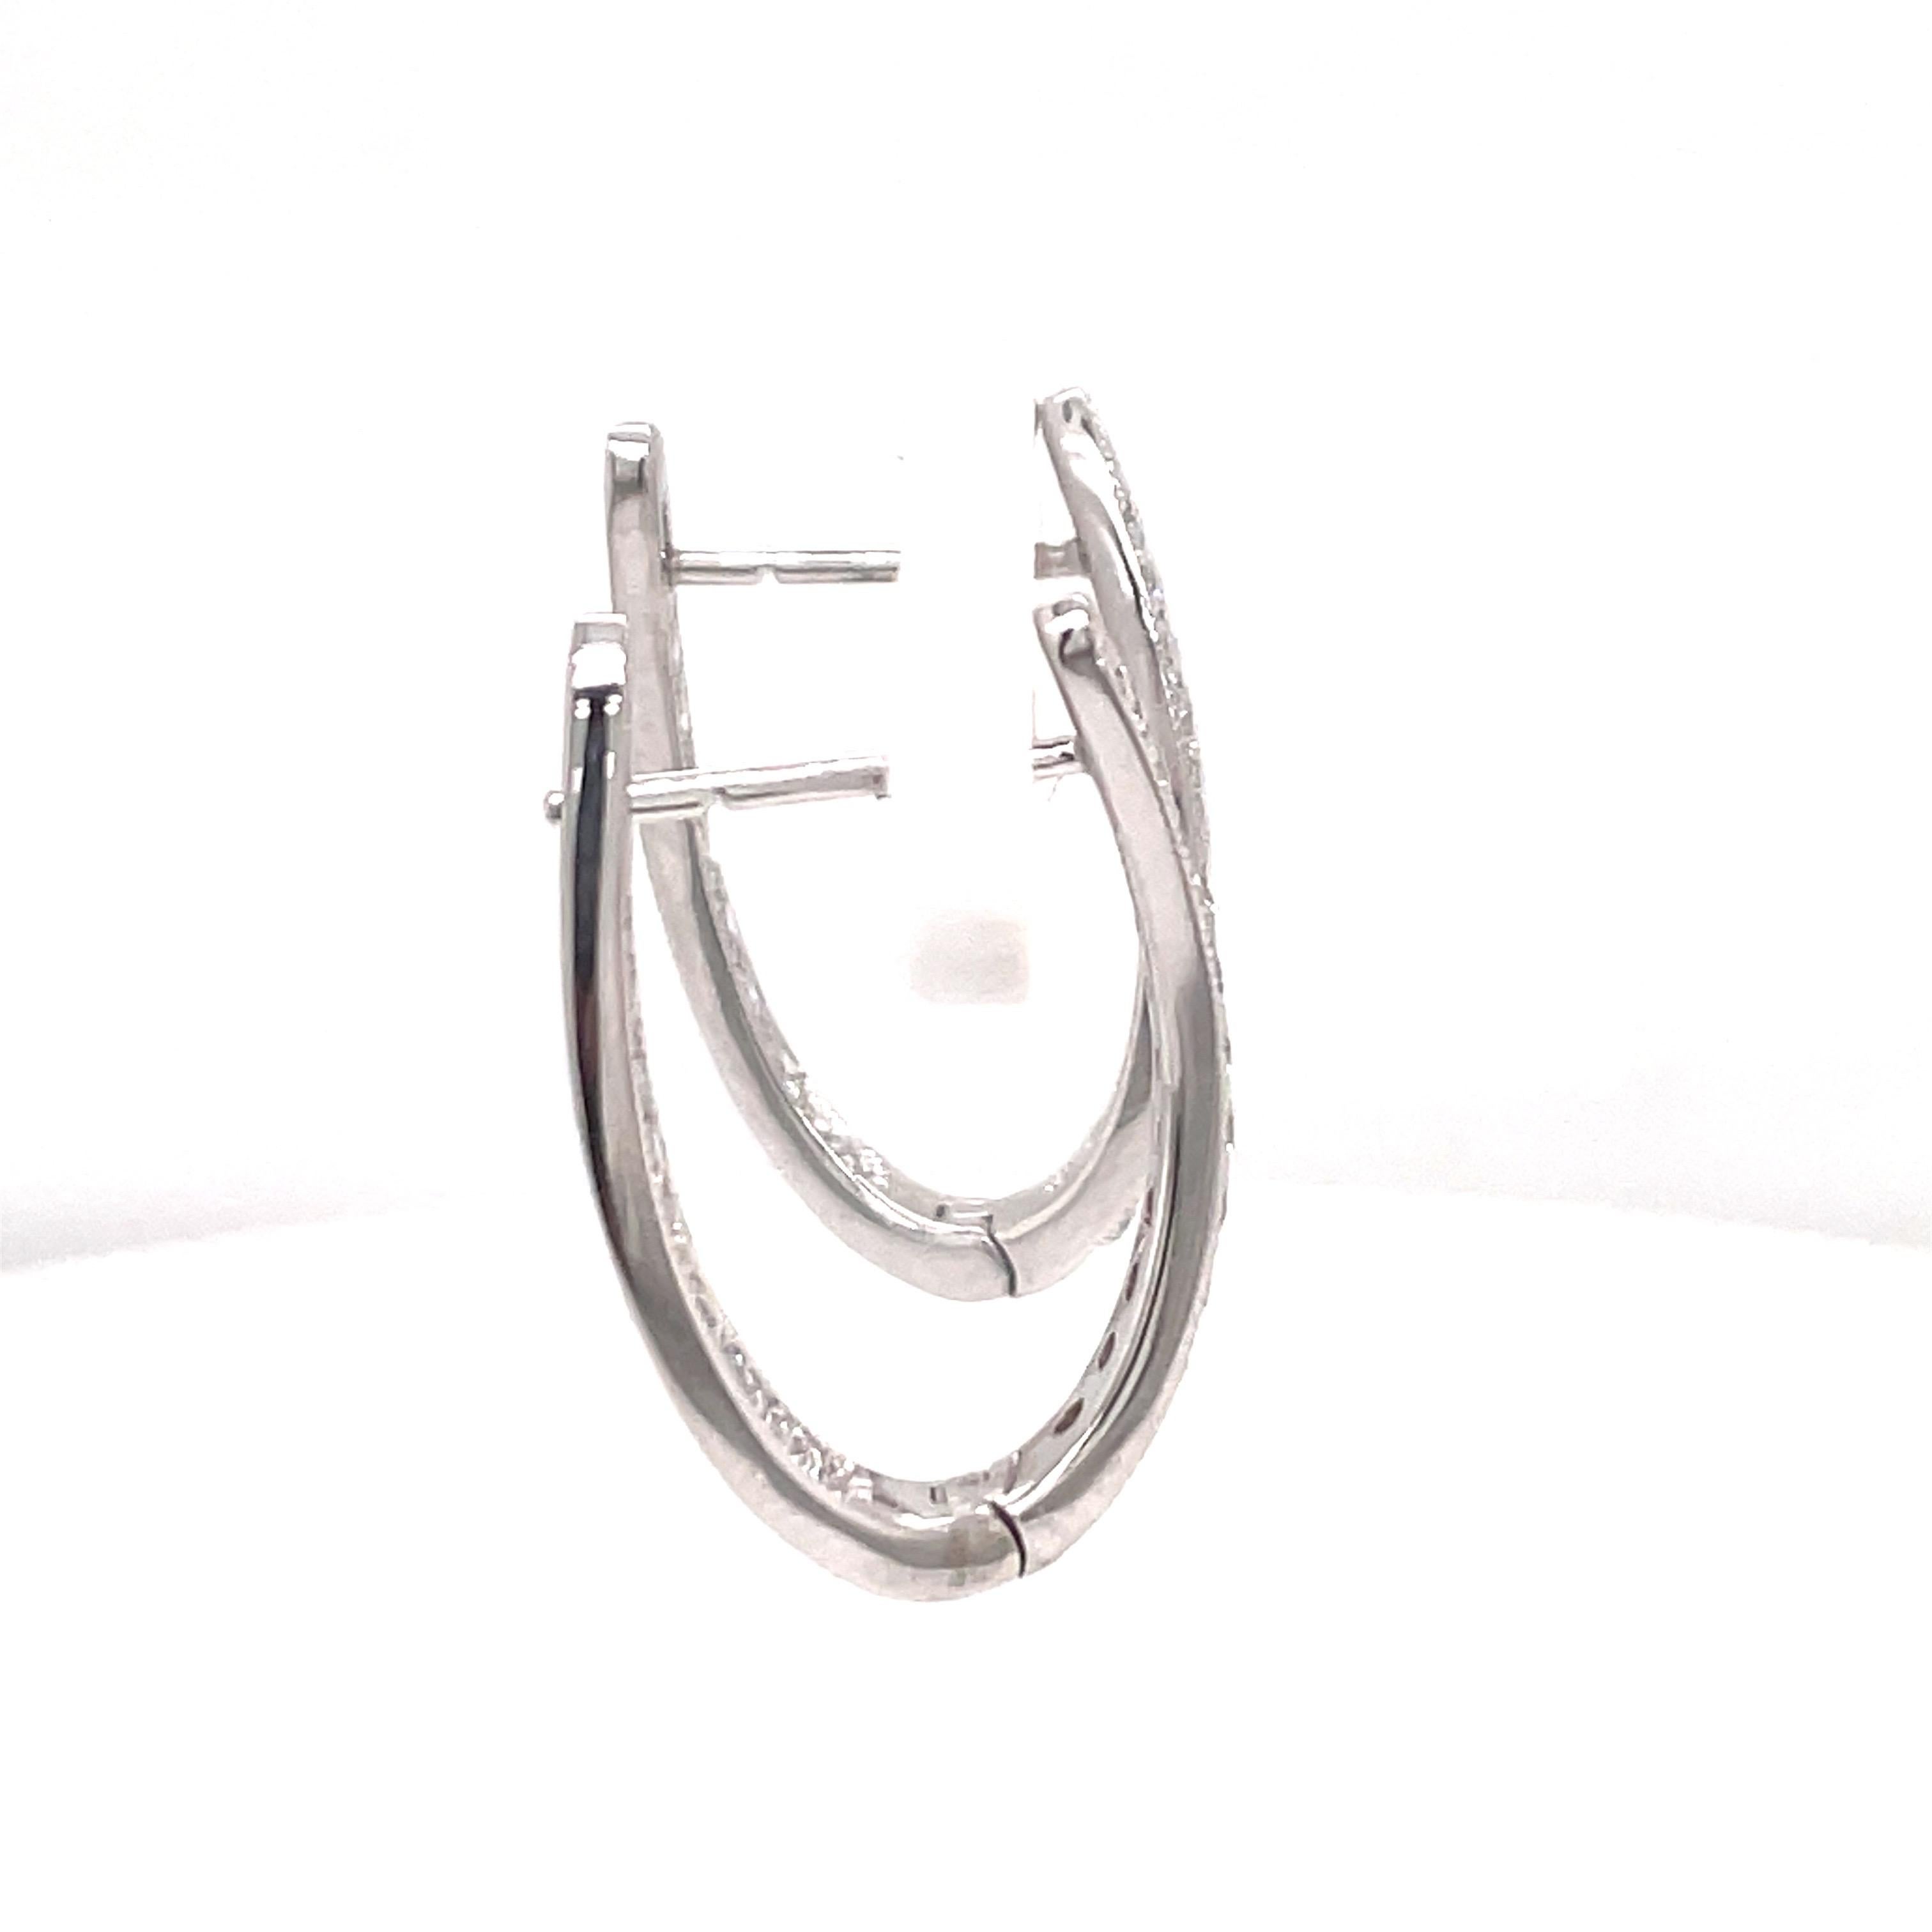 In and Out Diamond Hoop Earrings 0.65 Carats 14 Karat White Gold 3.5 Grams For Sale 1